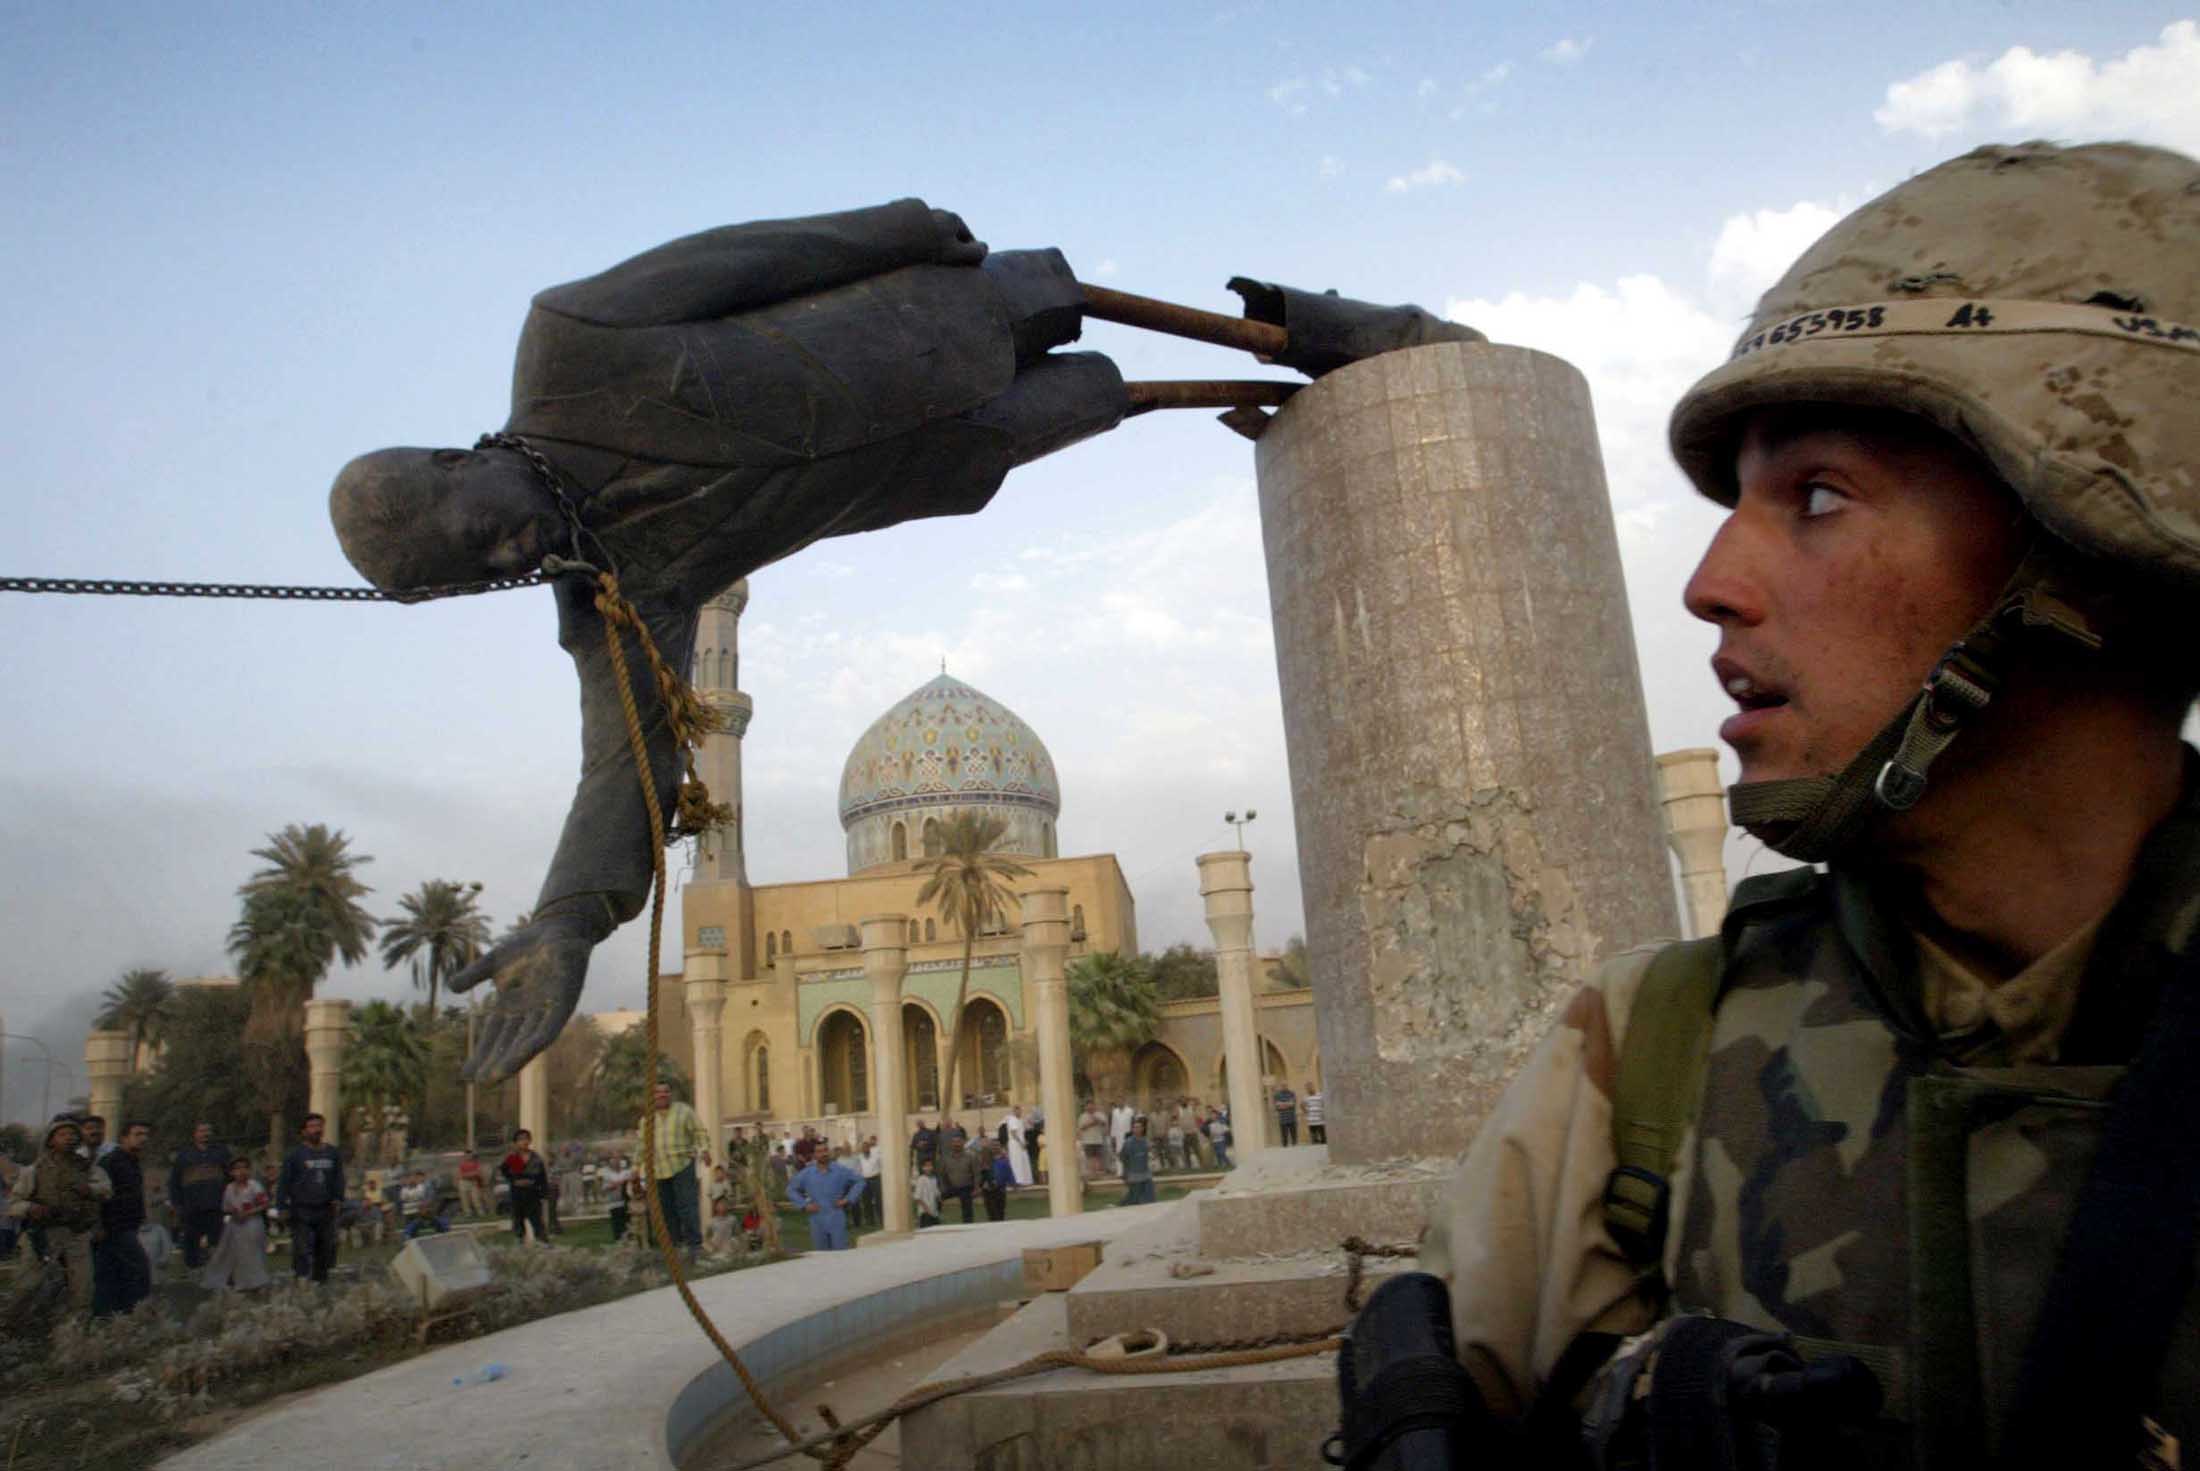 FILE PHOTO OF US MARINE WATCHES AS STATUE OF SADDAM HUSSEIN FALLS IN CENTRAL BAGHDAD.